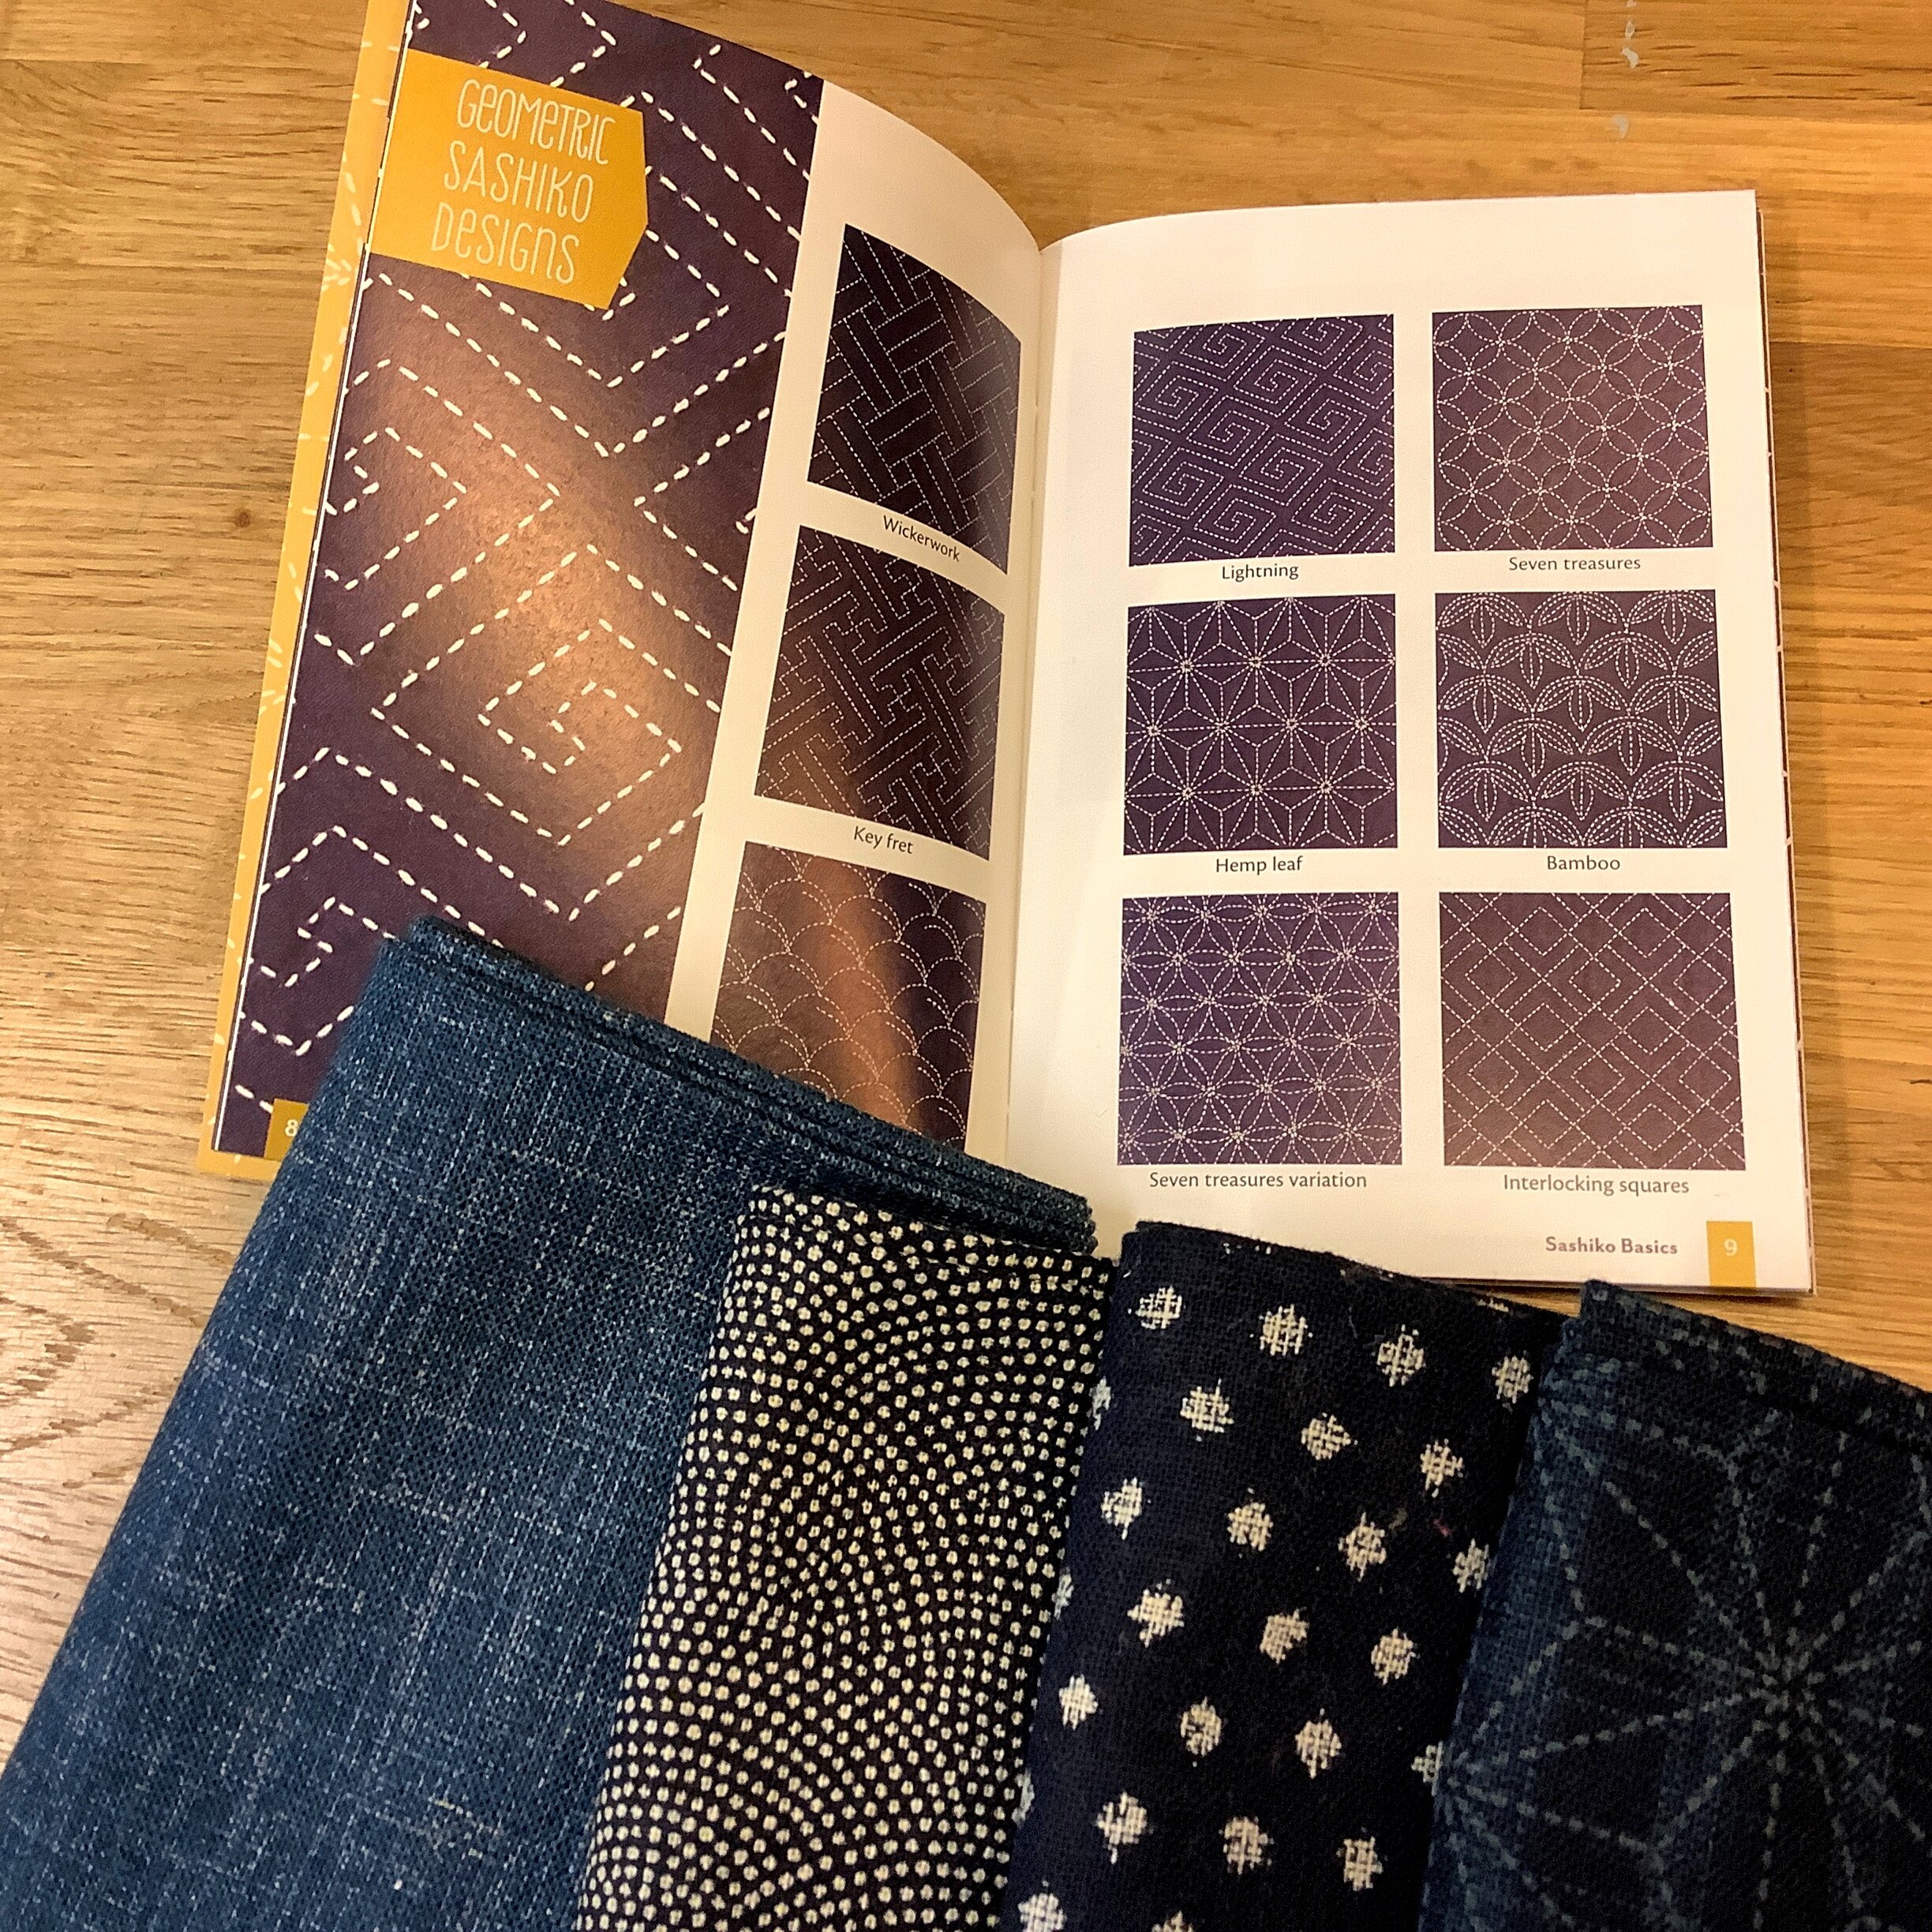 Sashiko Embroidery with Artist-in-Residence Jennie Maydew